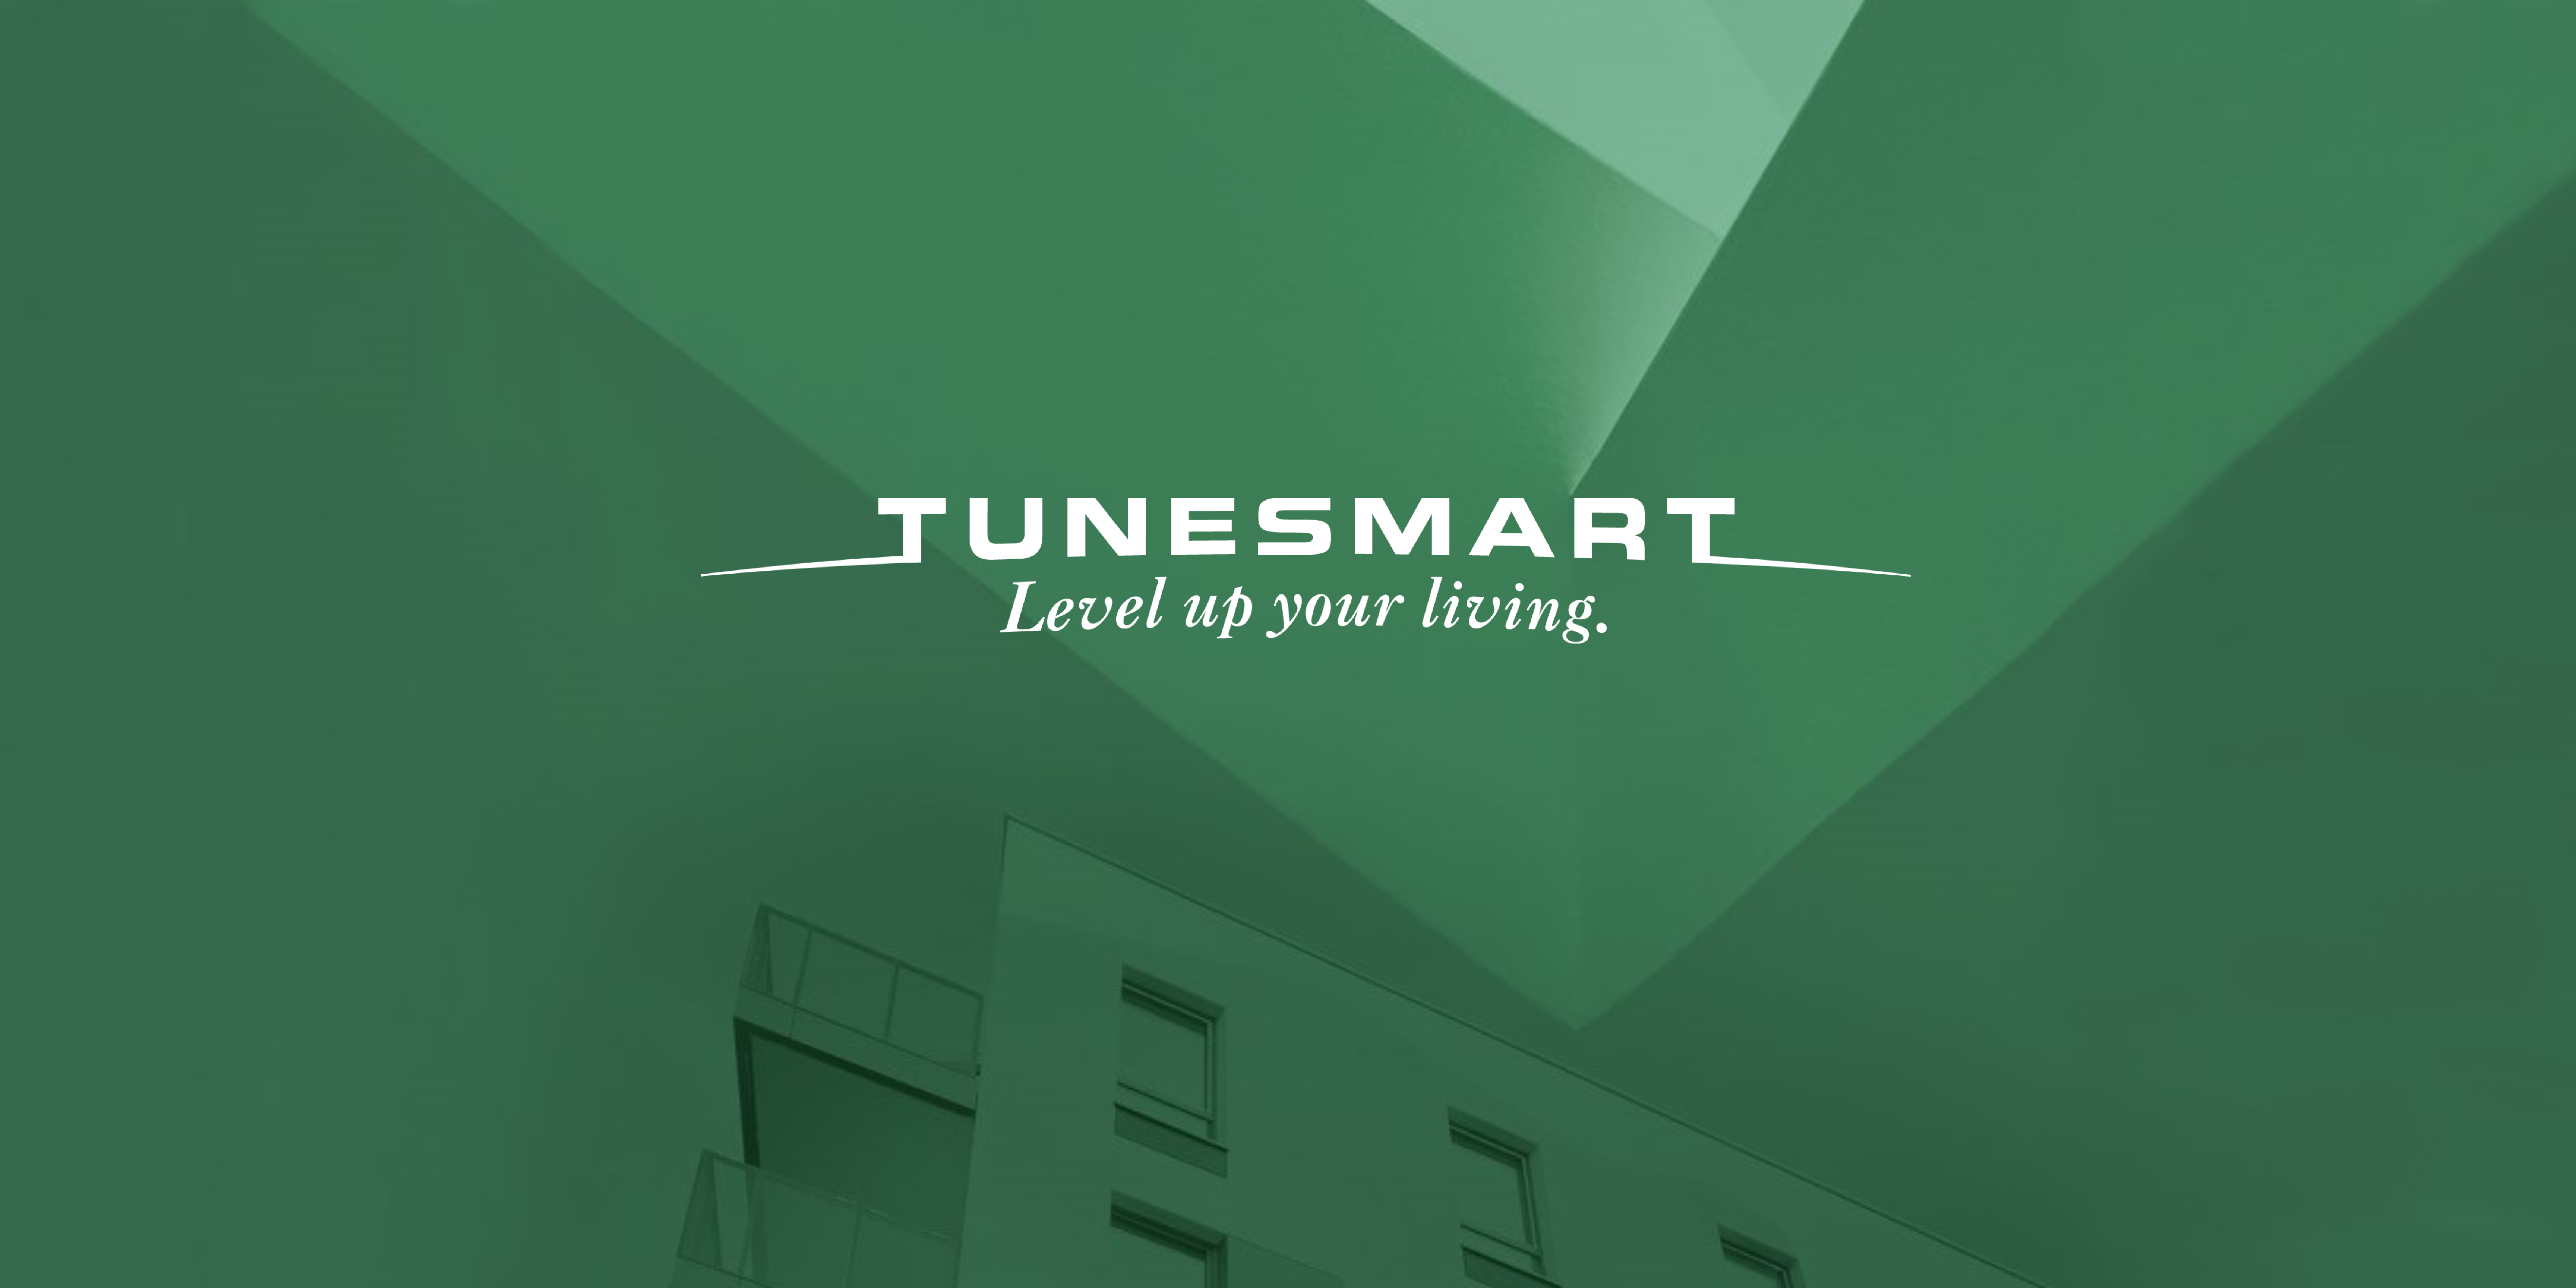 Tunesmart Level up your living